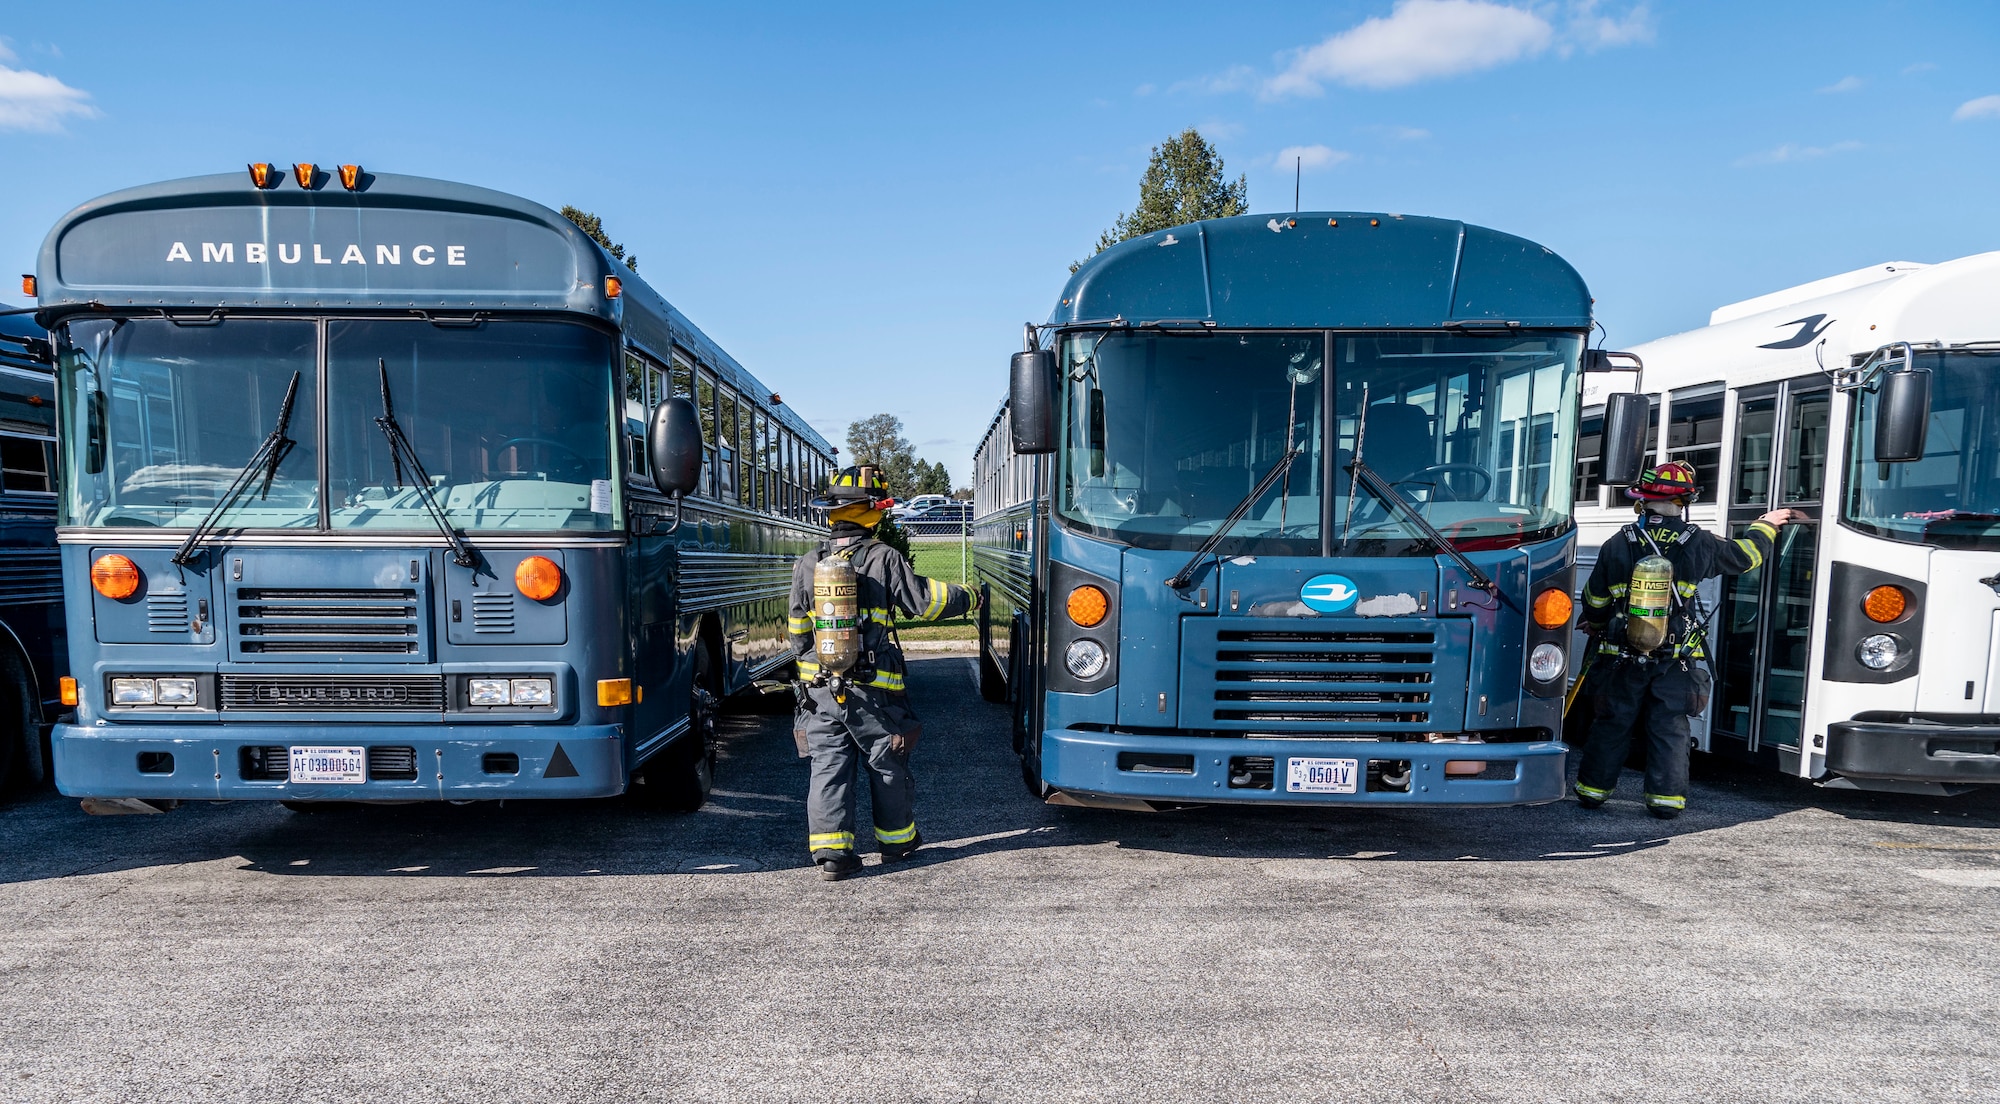 Firefighters from the 436th Civil Engineer Squadron search logistic readiness squadron buses for a suspicious package during a force protection exercise Nov. 18, 2020, at Dover Air Force Base, Delaware. Team Dover first responders were tested through numerous scenarios, to help ensure the continued safety of base personnel and assets. (U.S. Air Force photo by Senior Airman Christopher Quail)